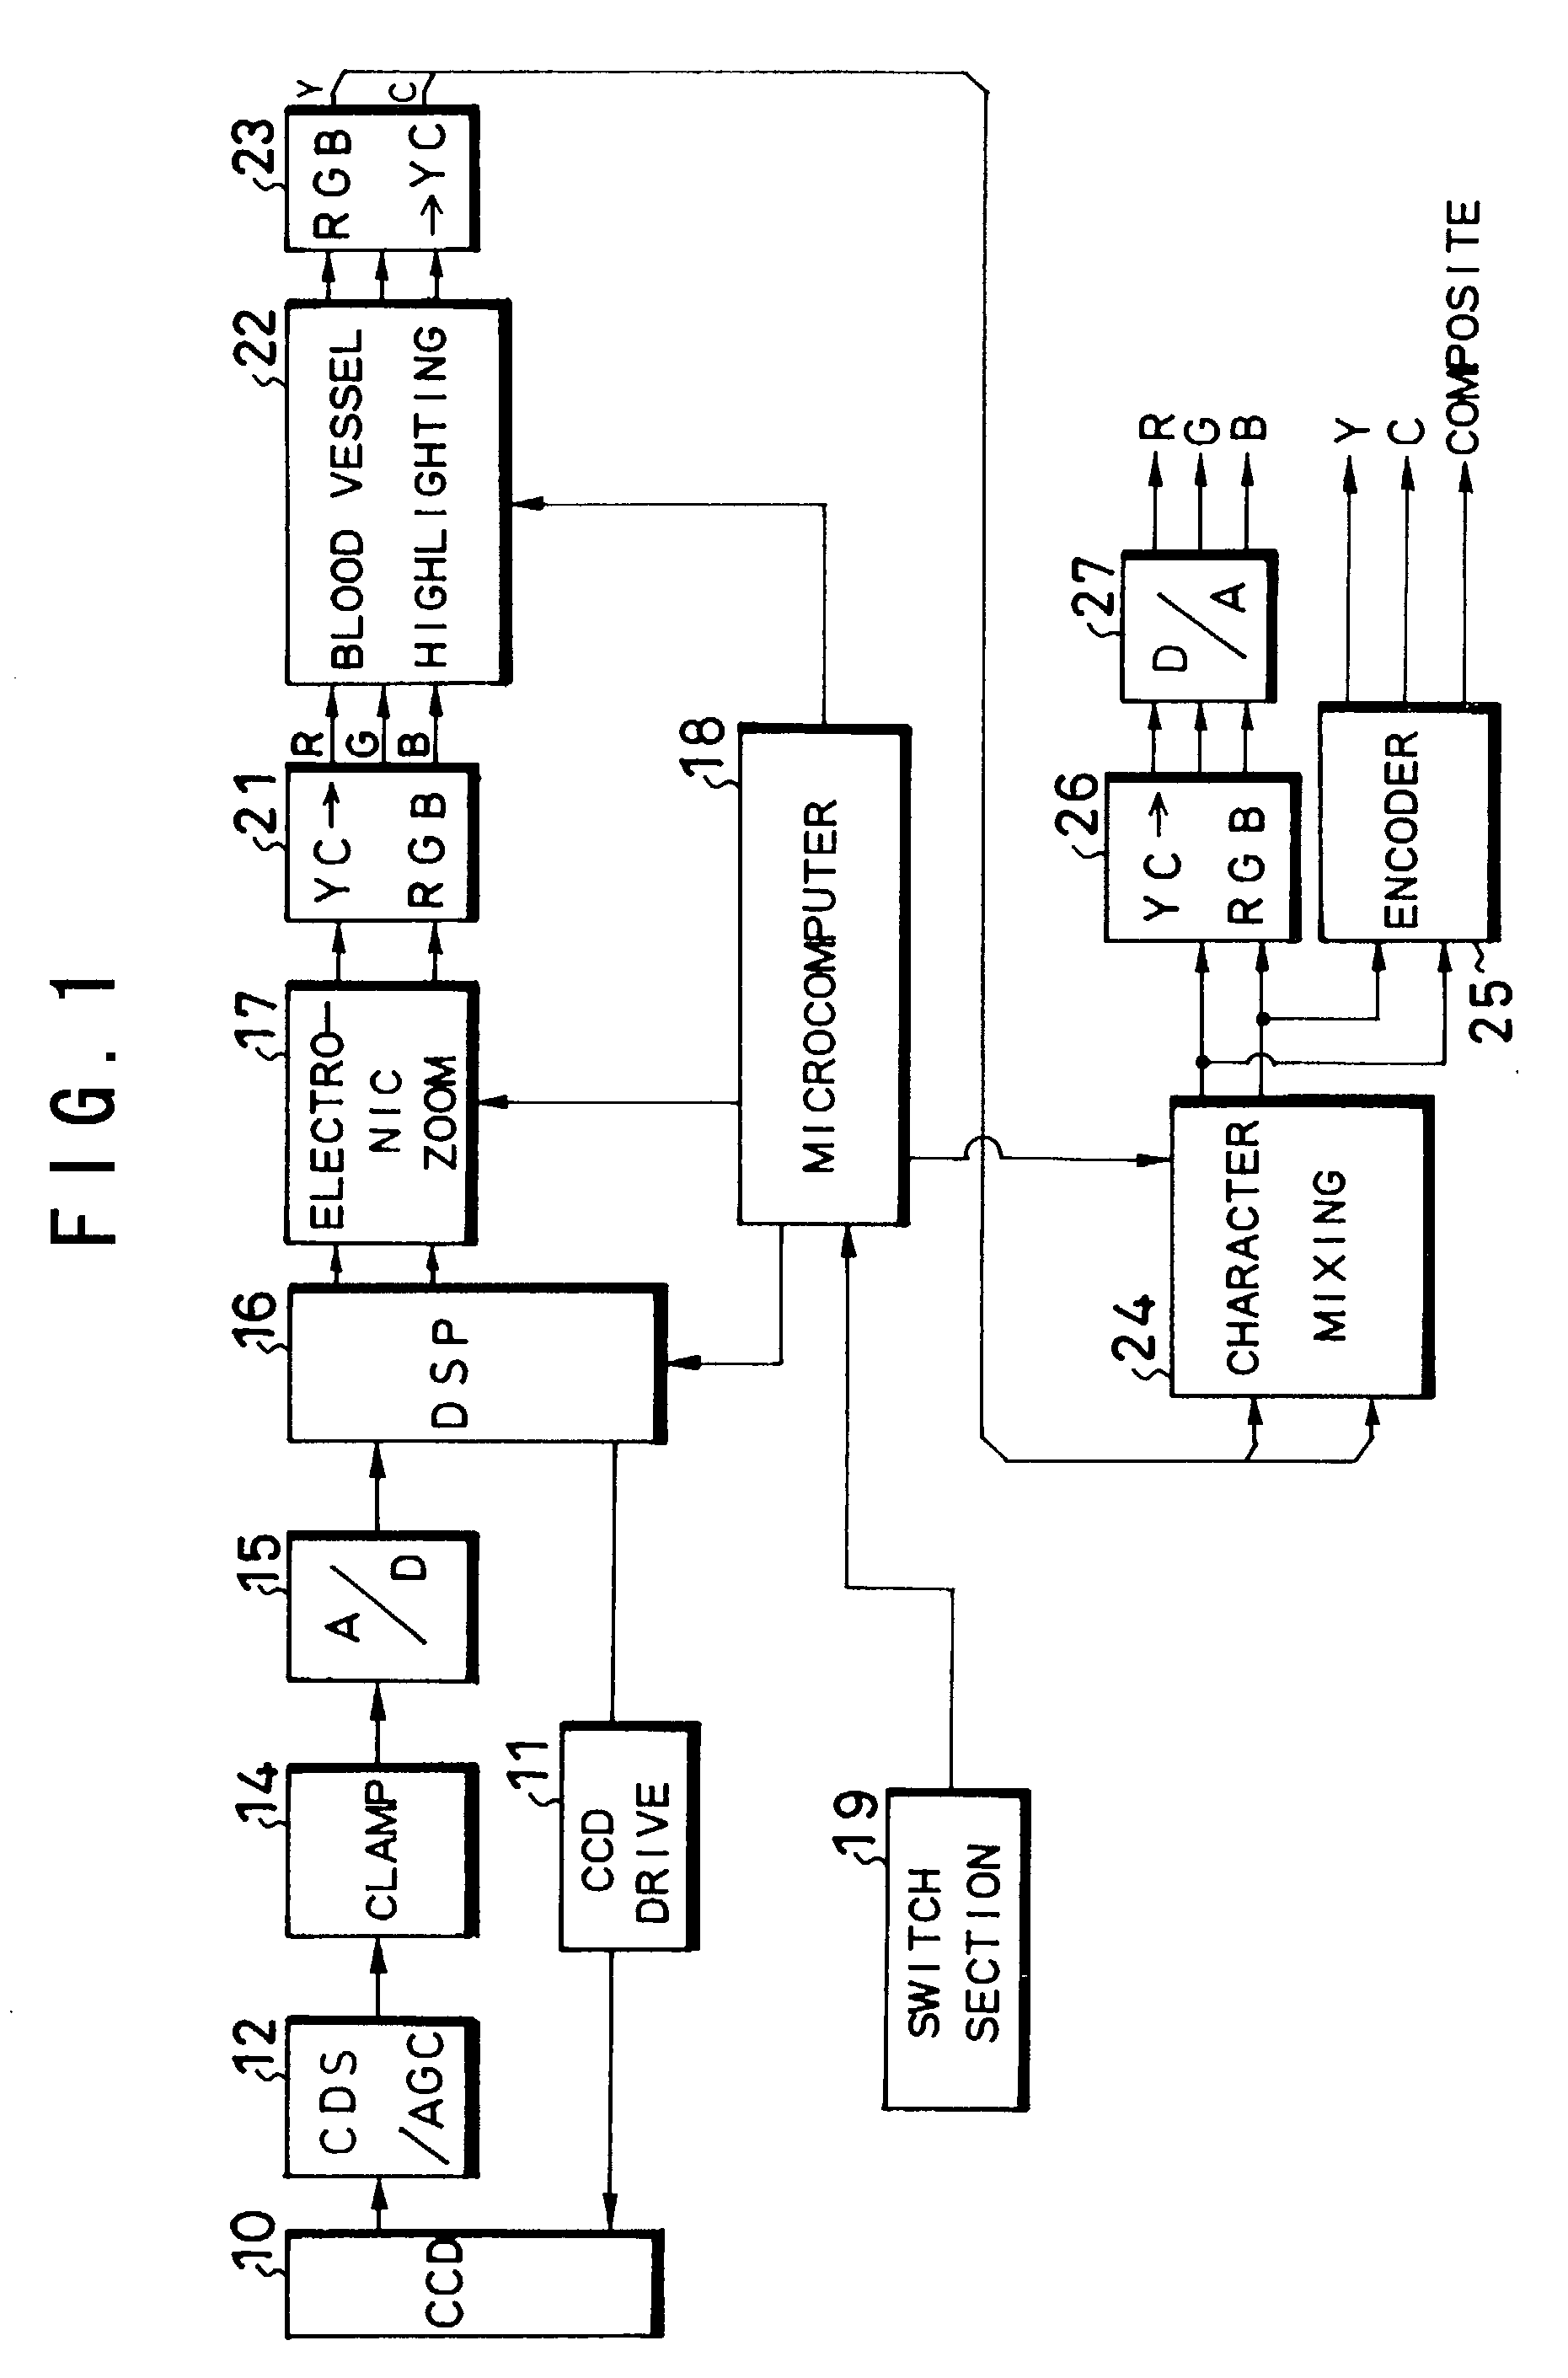 Electronic endoscope for highlighting blood vessel